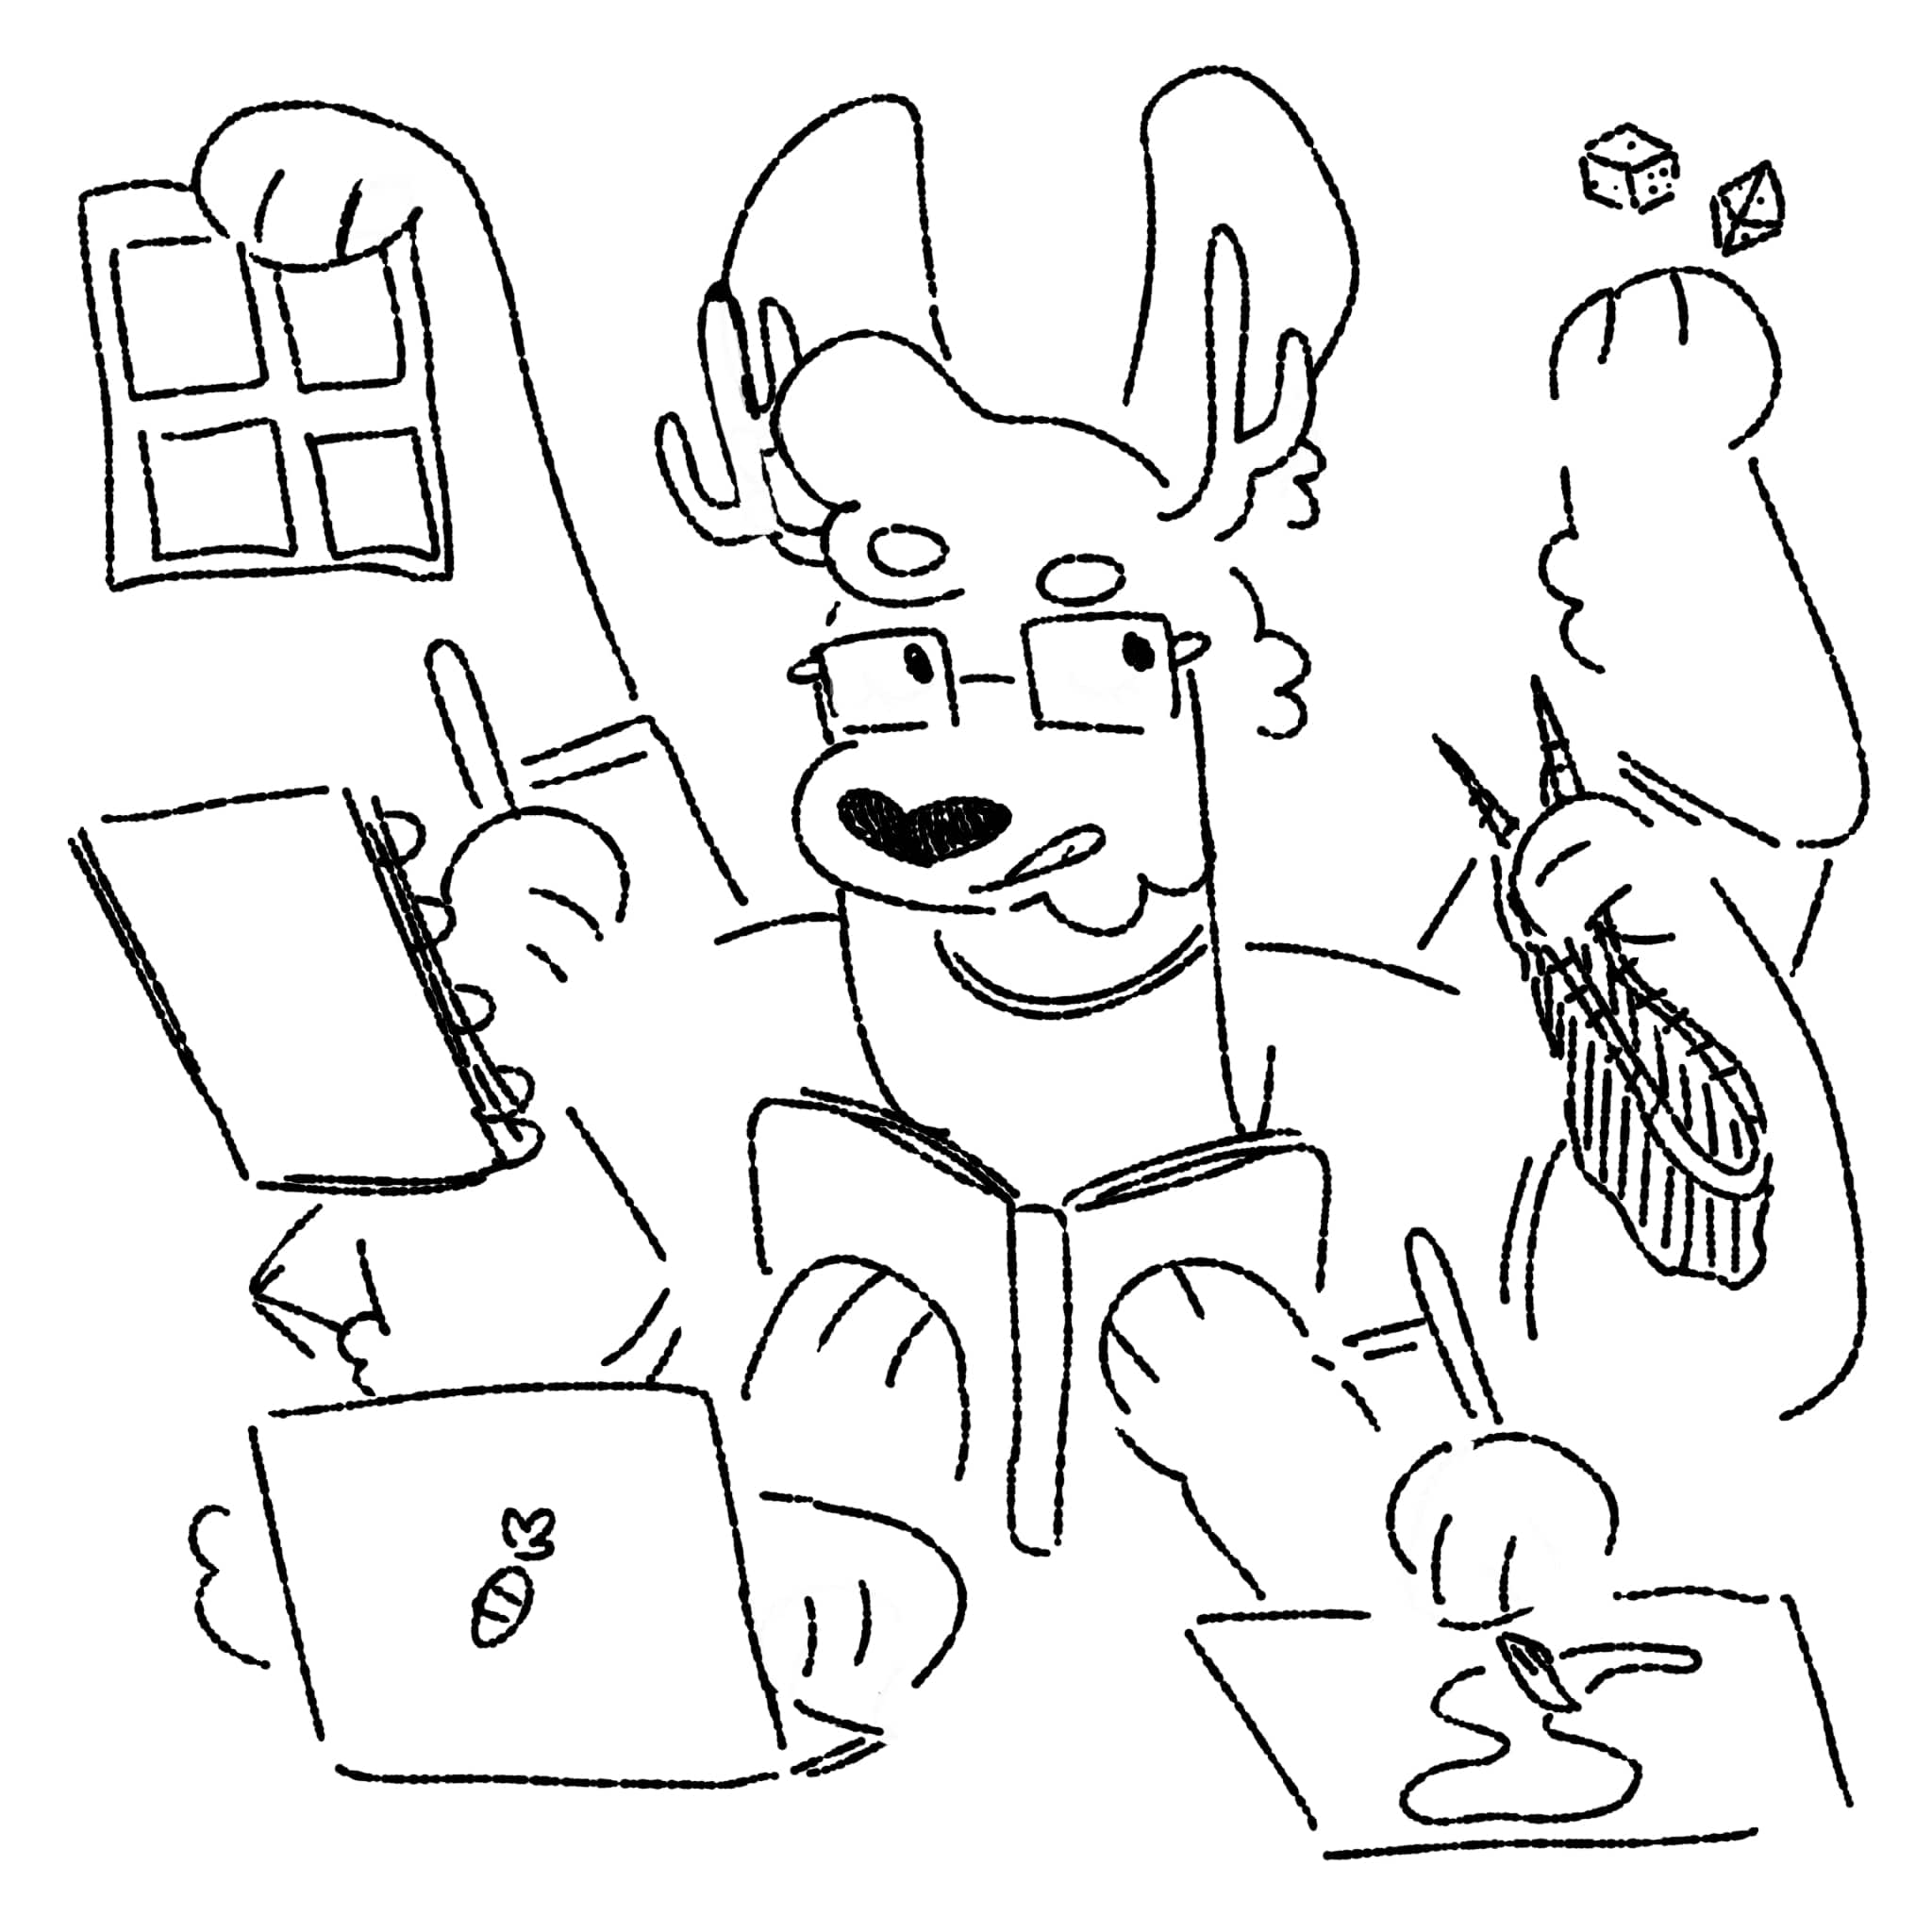 A picture of a jackalope juggling various tasks, such as rolling dice, writing, drawing, and painting.